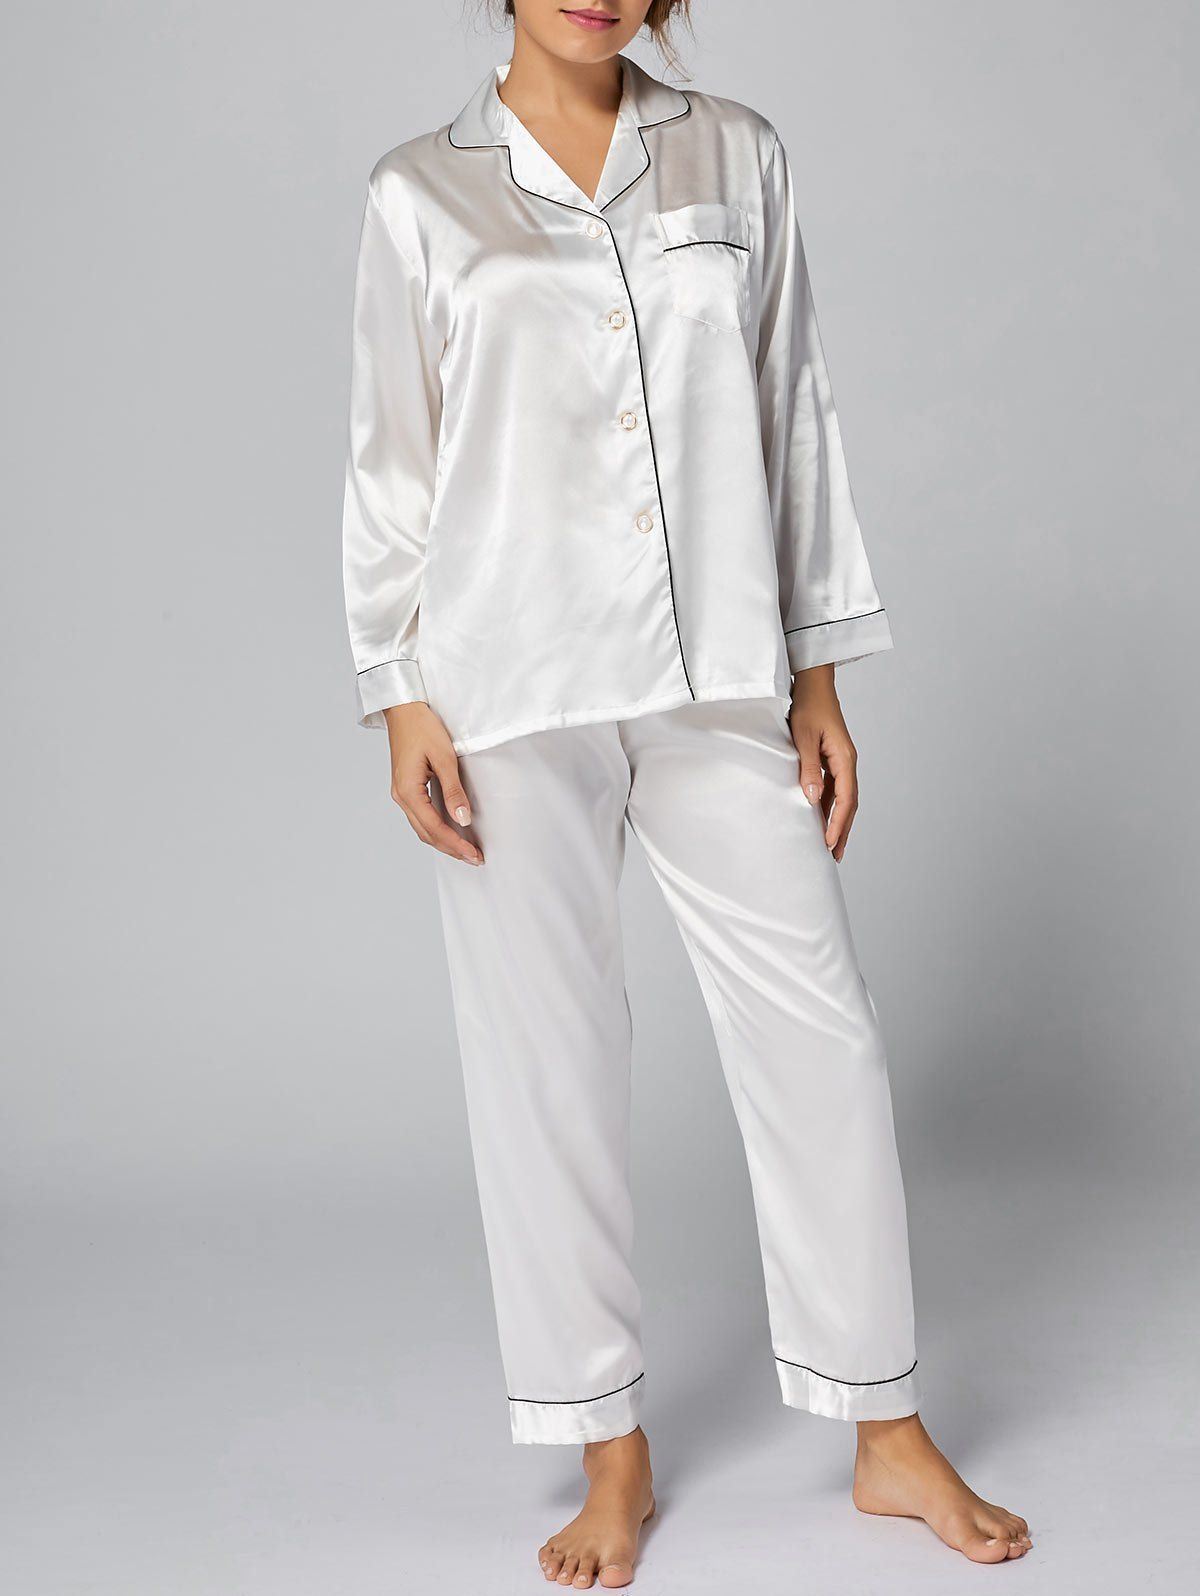 [41% OFF] 2021 Long Sleeve Satin Button Up Pajama Set In WHITE | DressLily